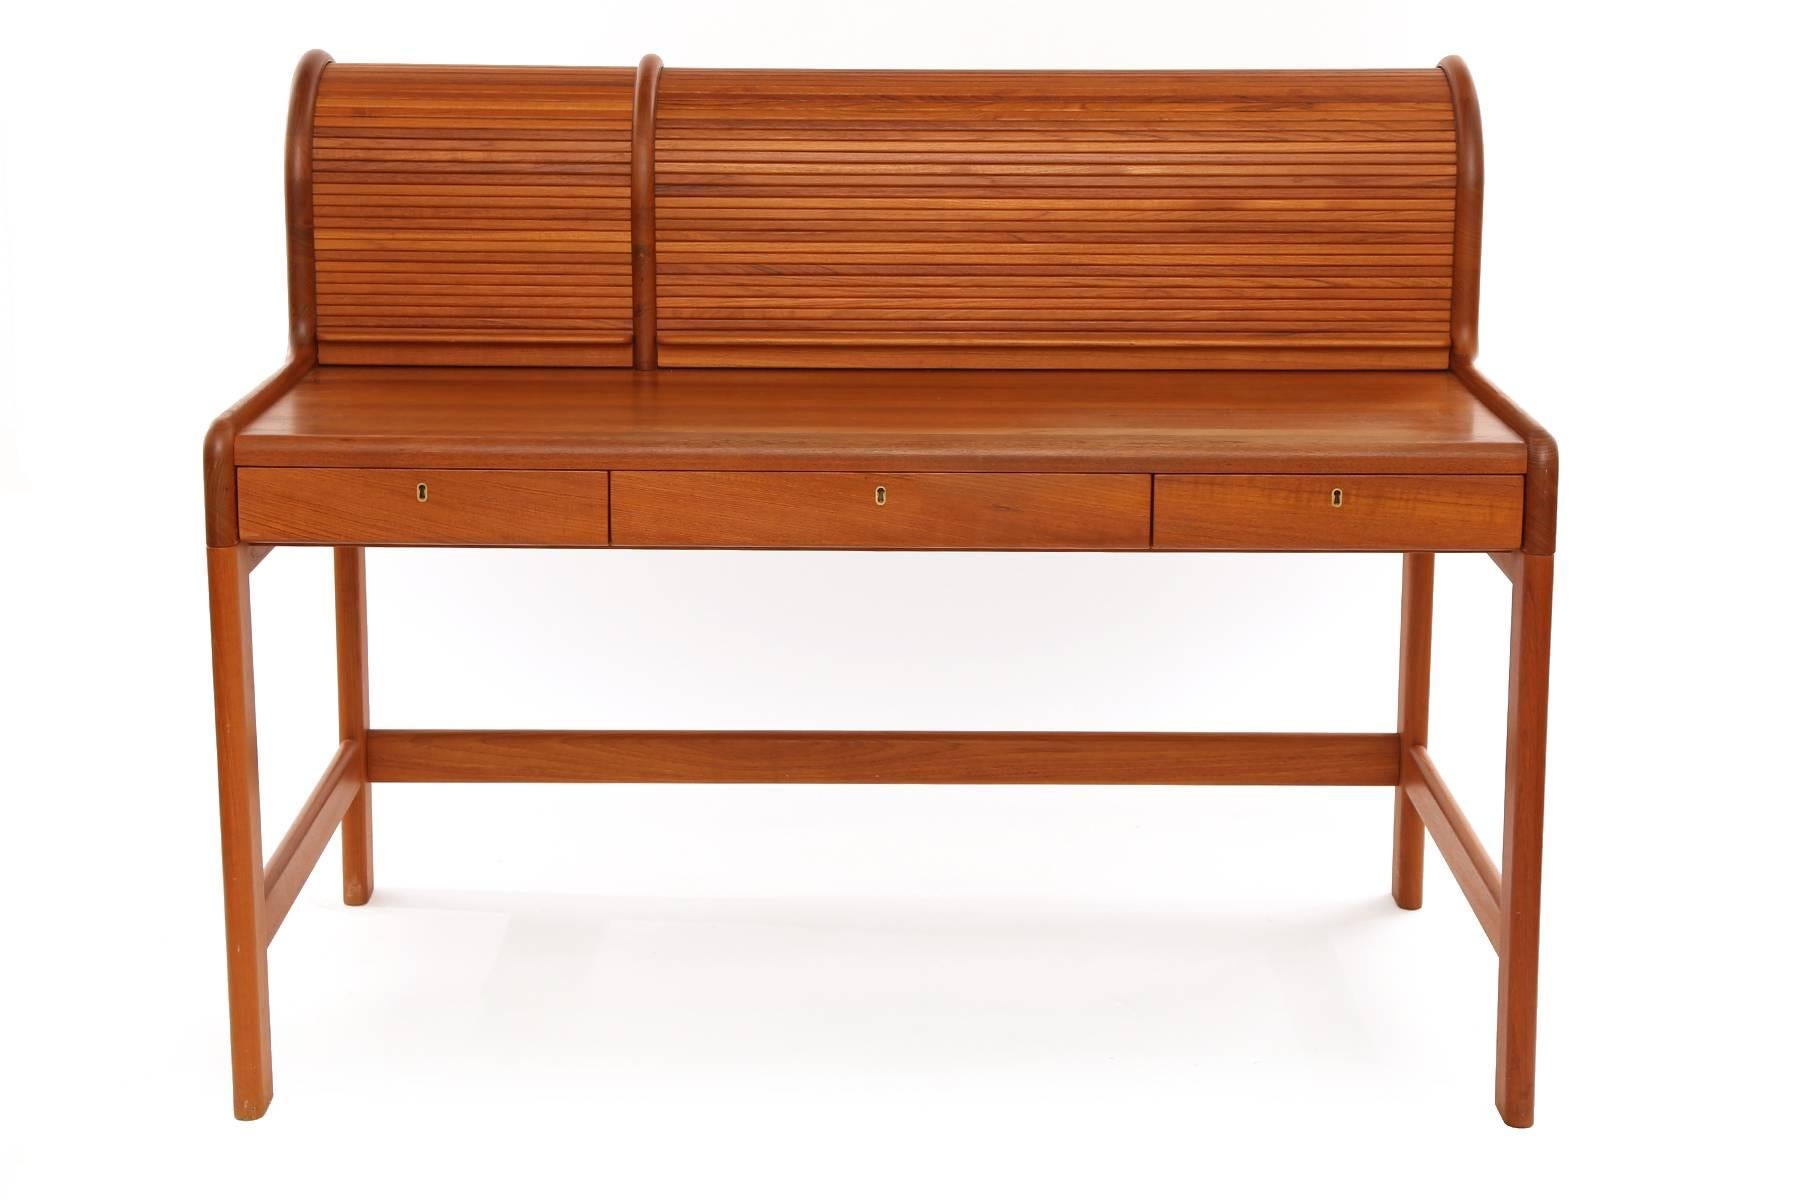 Solid teak roll top desk from Denmark, circa early 1970s. This all original example has two roll tops with interior shelves and three drawers. Writing surface height is 28 3/4